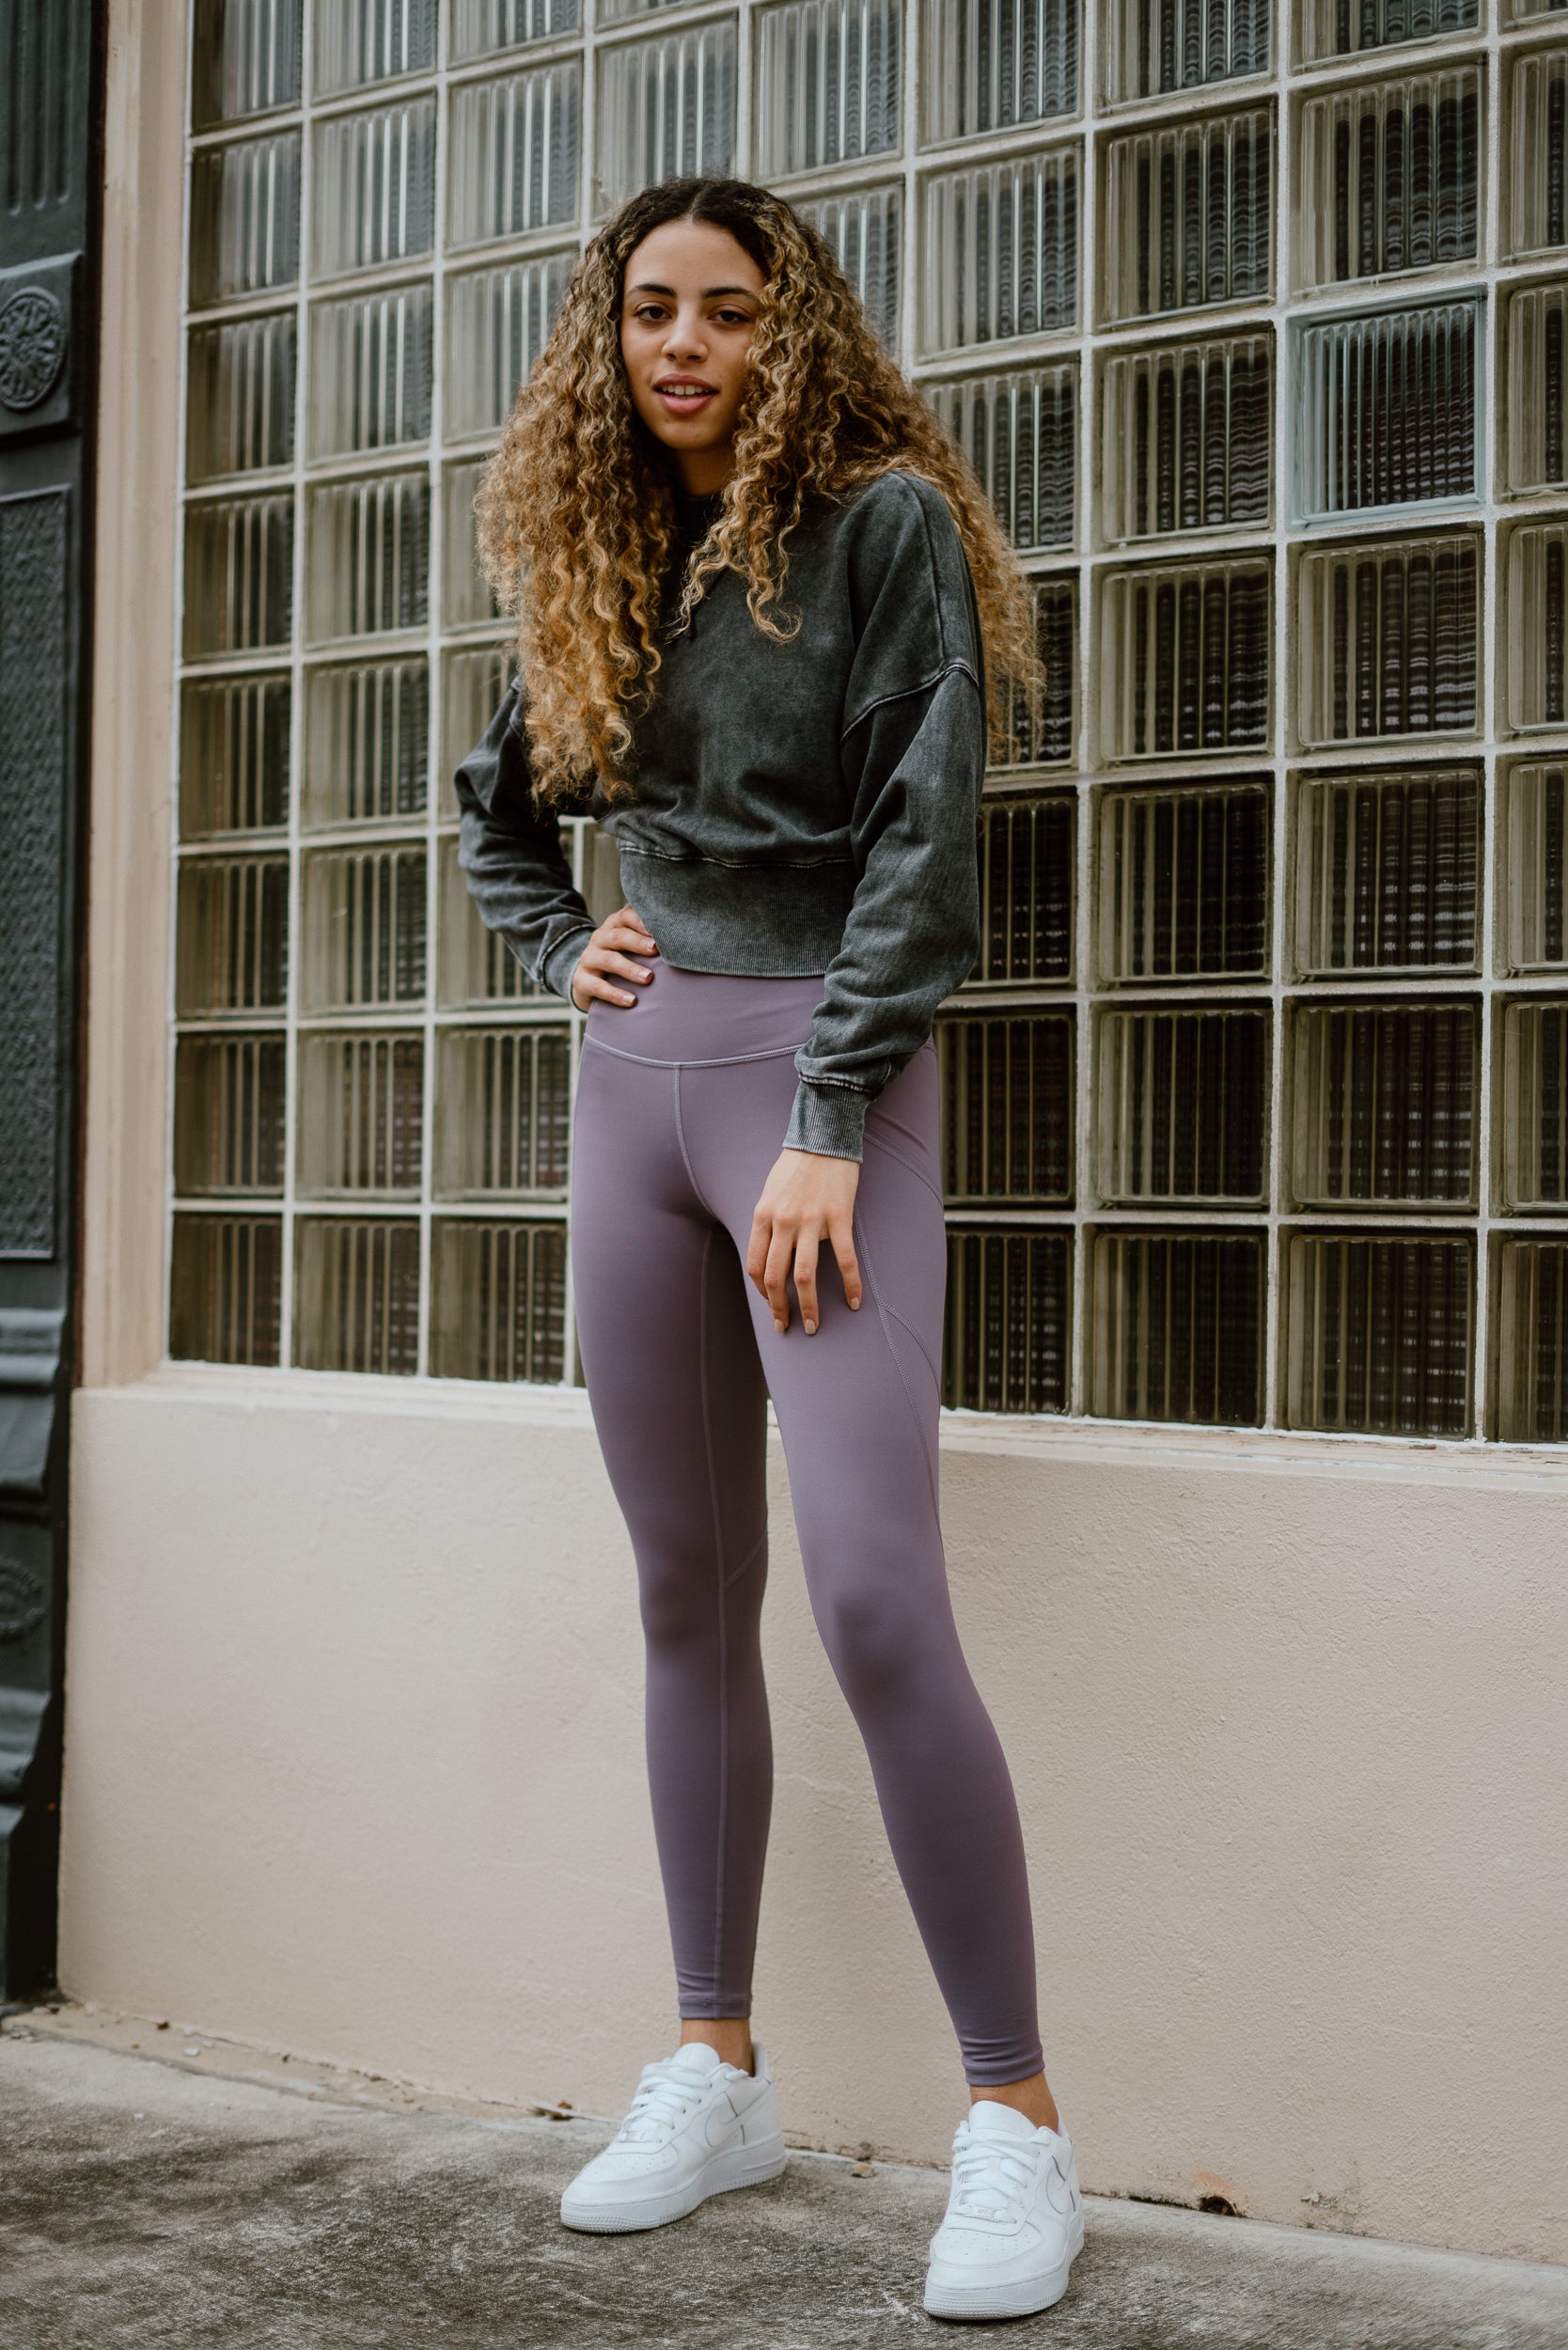 Free People Movement Self-Hem Ecology Leggings Lilac Made in Italy $140, FF-106